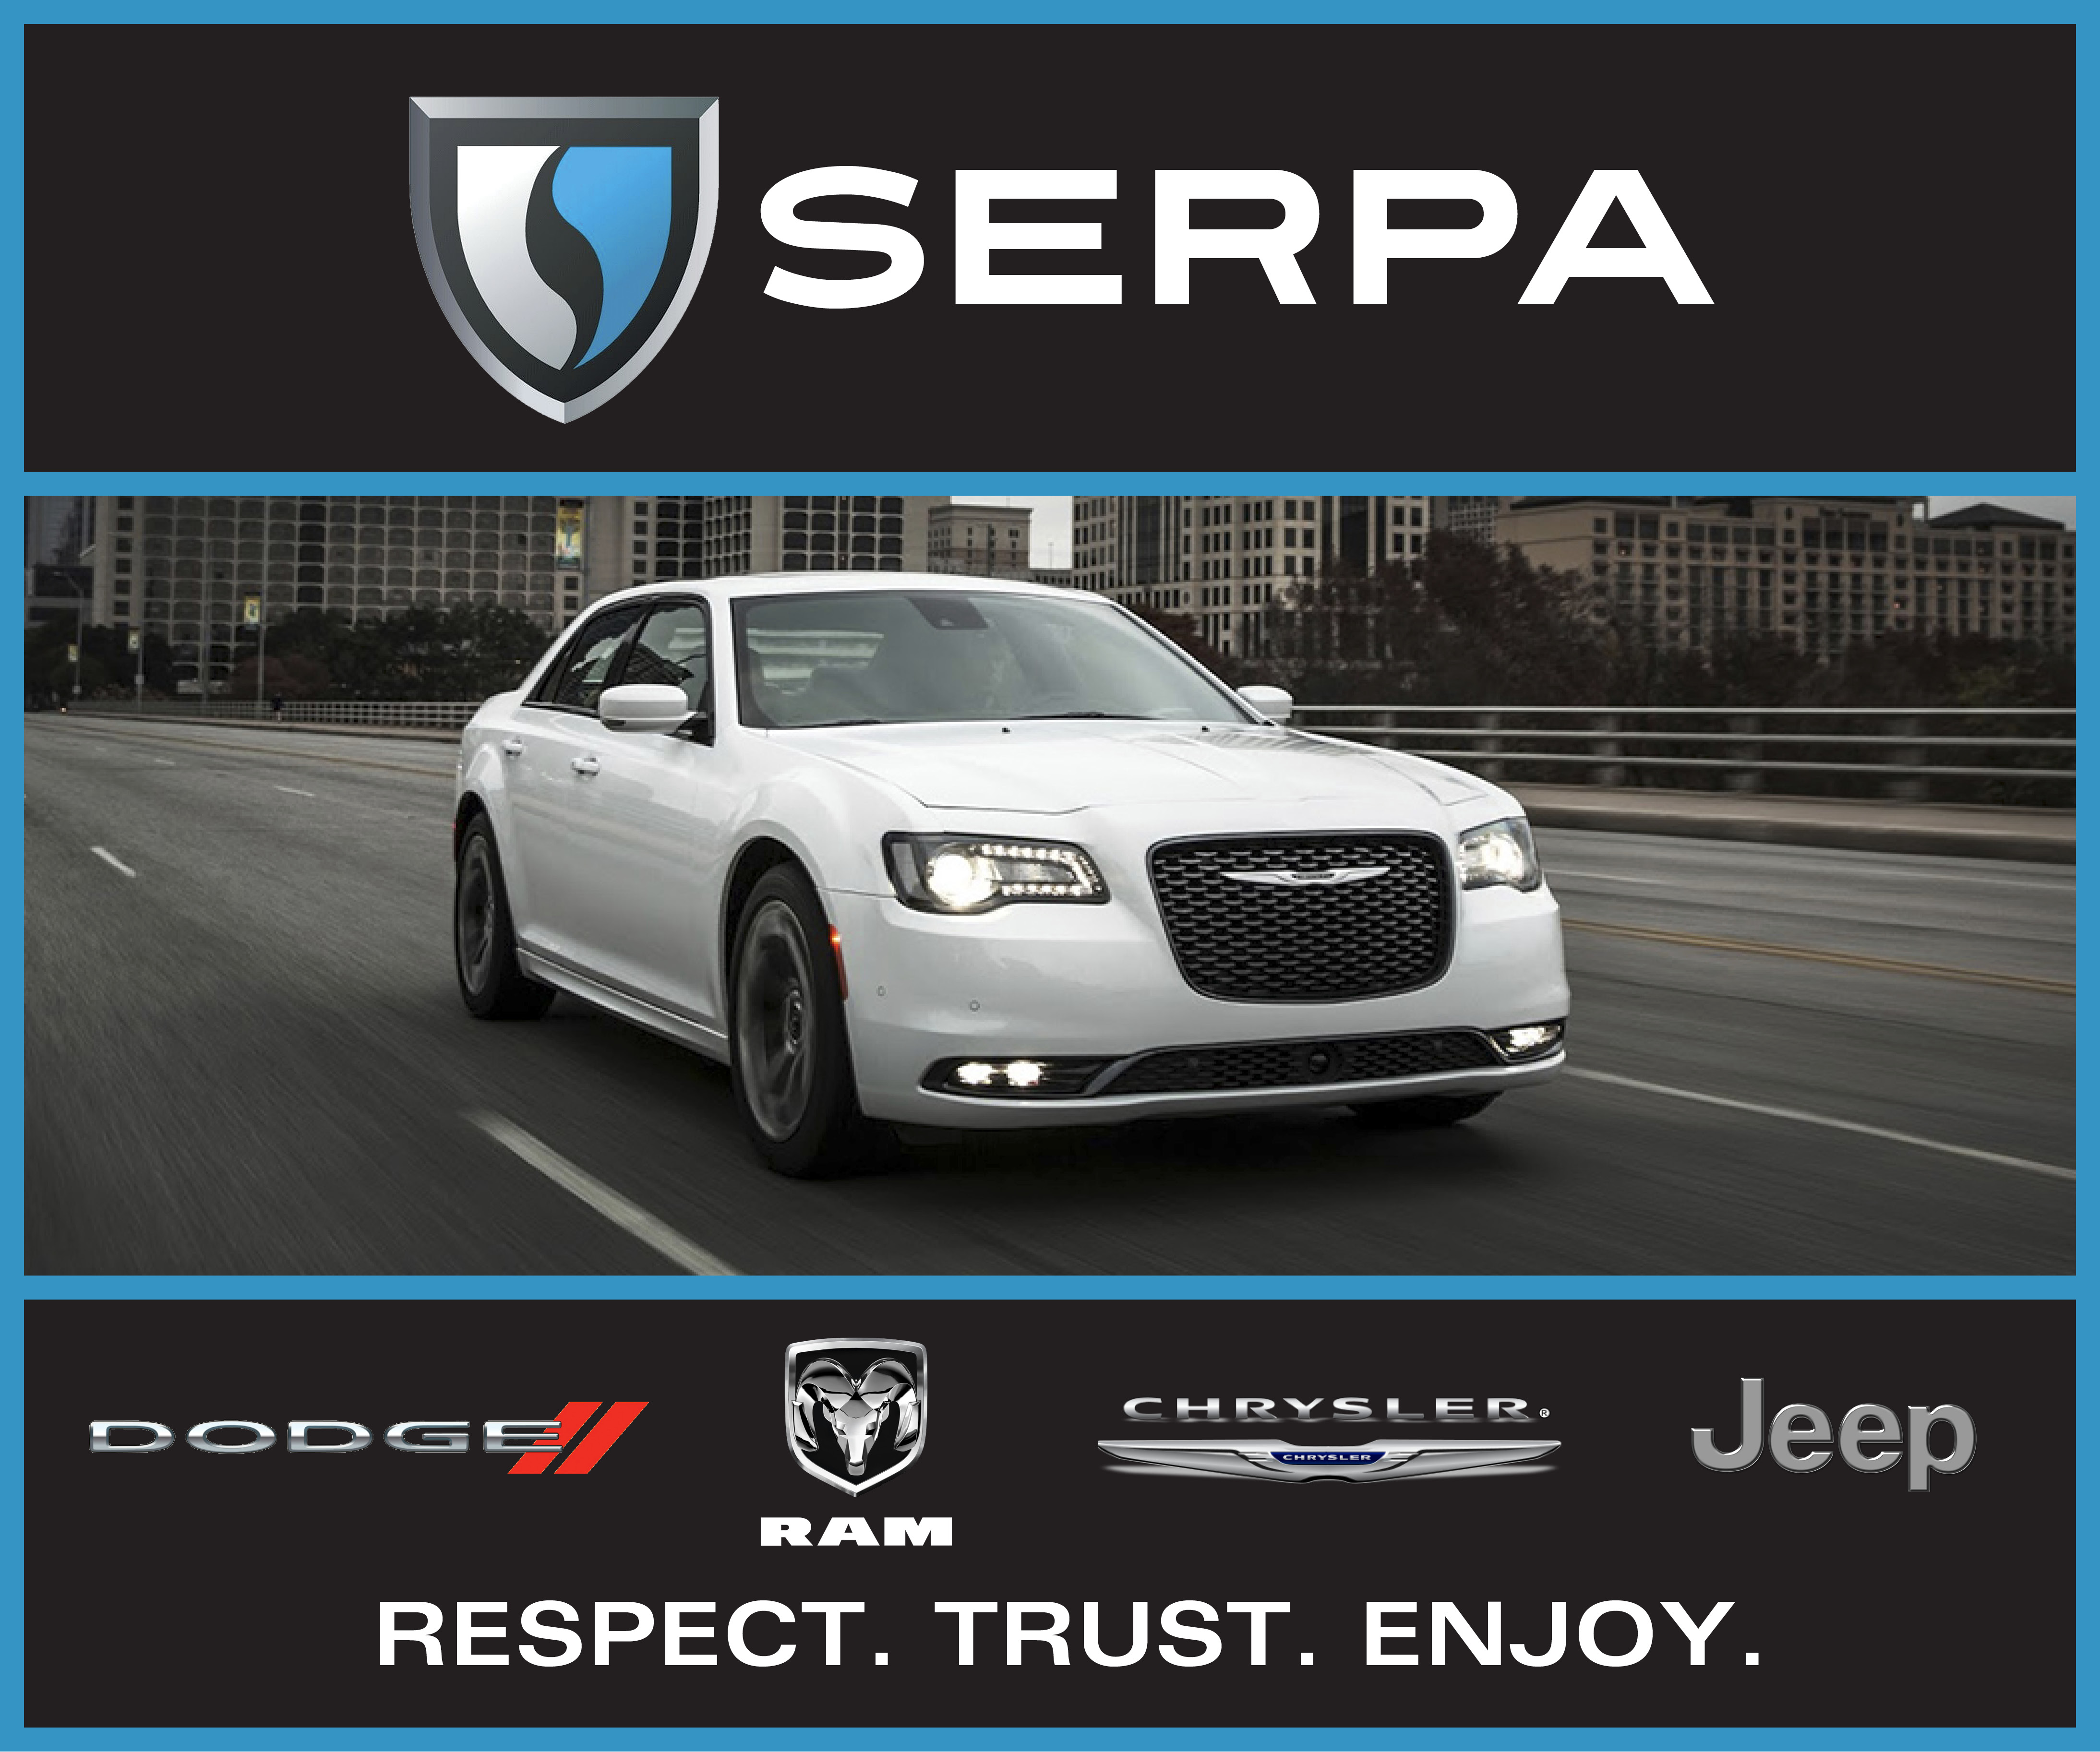 More from Serpa Chrysler